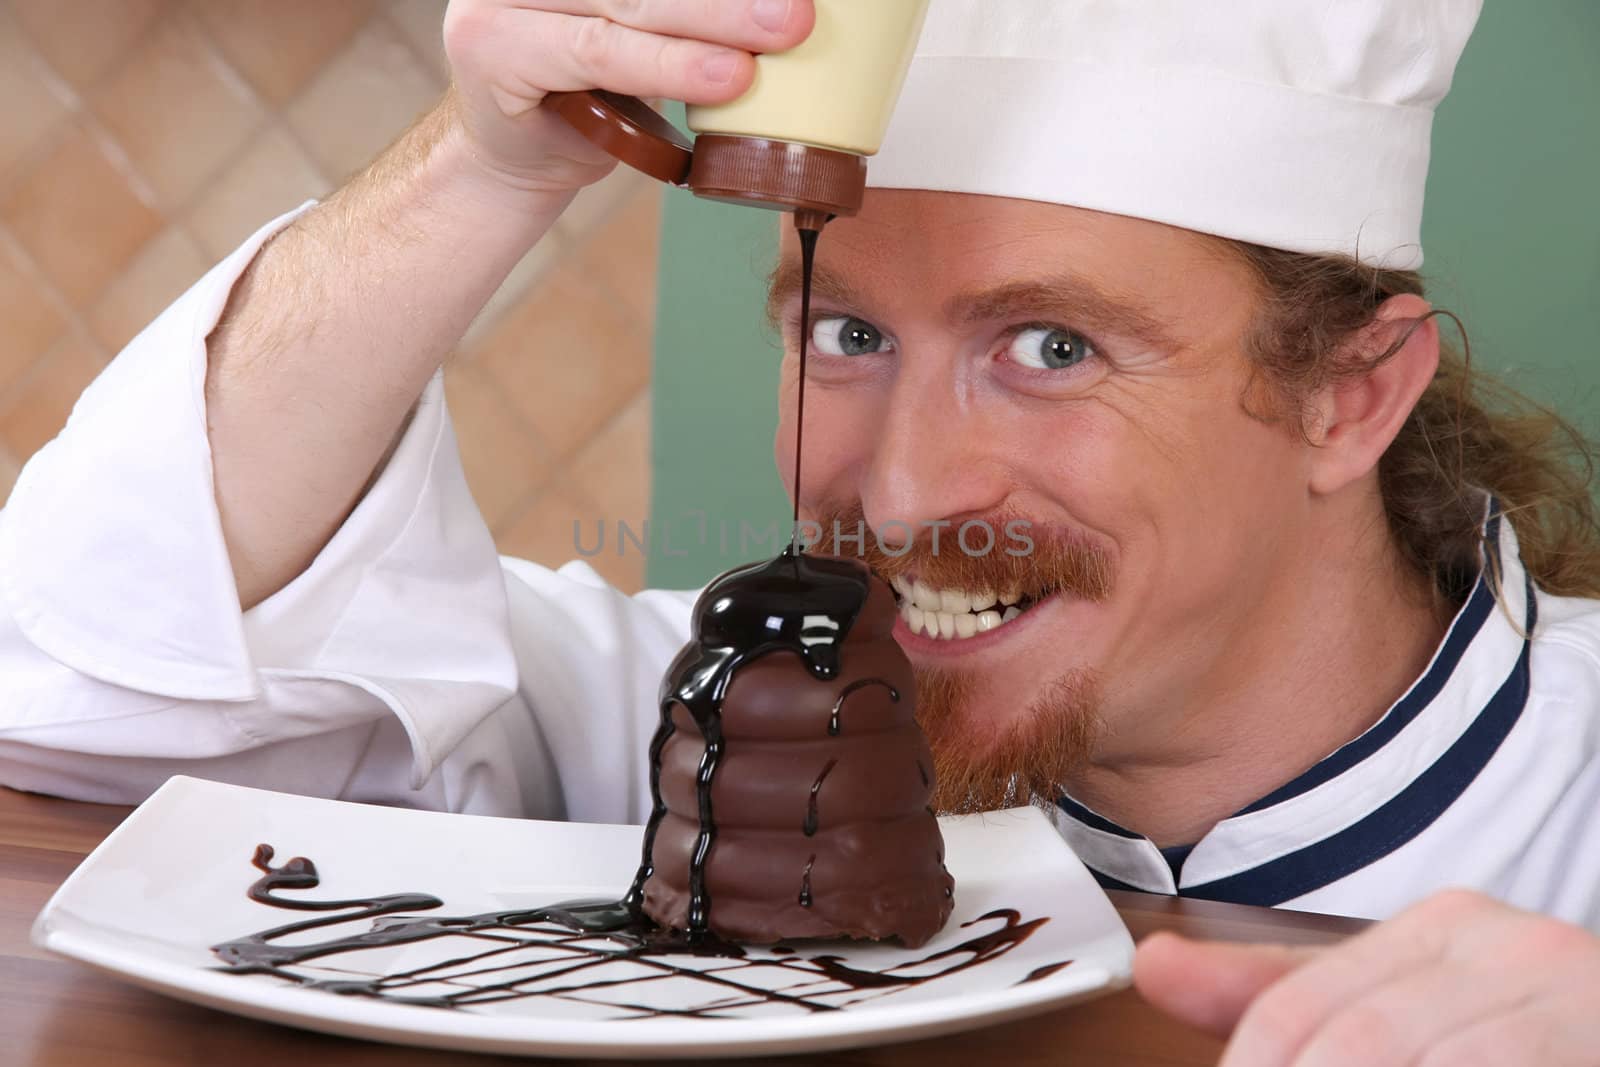 Funny young chef added chocolate sauce at piece of cake